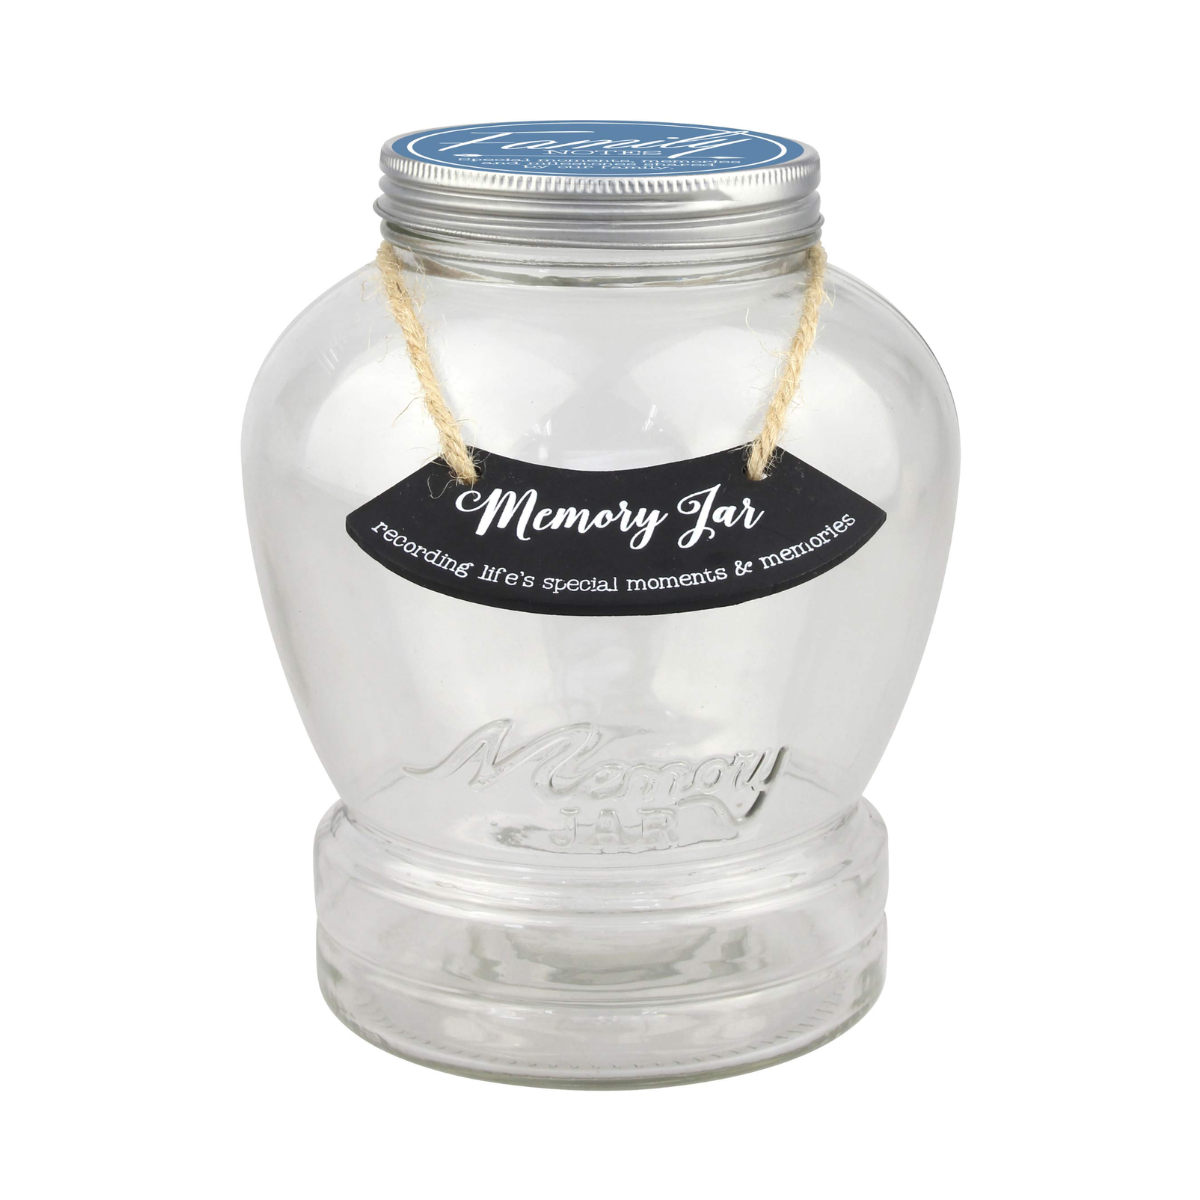 13. Preserve Your Love Story with a Personalized Memory Jar